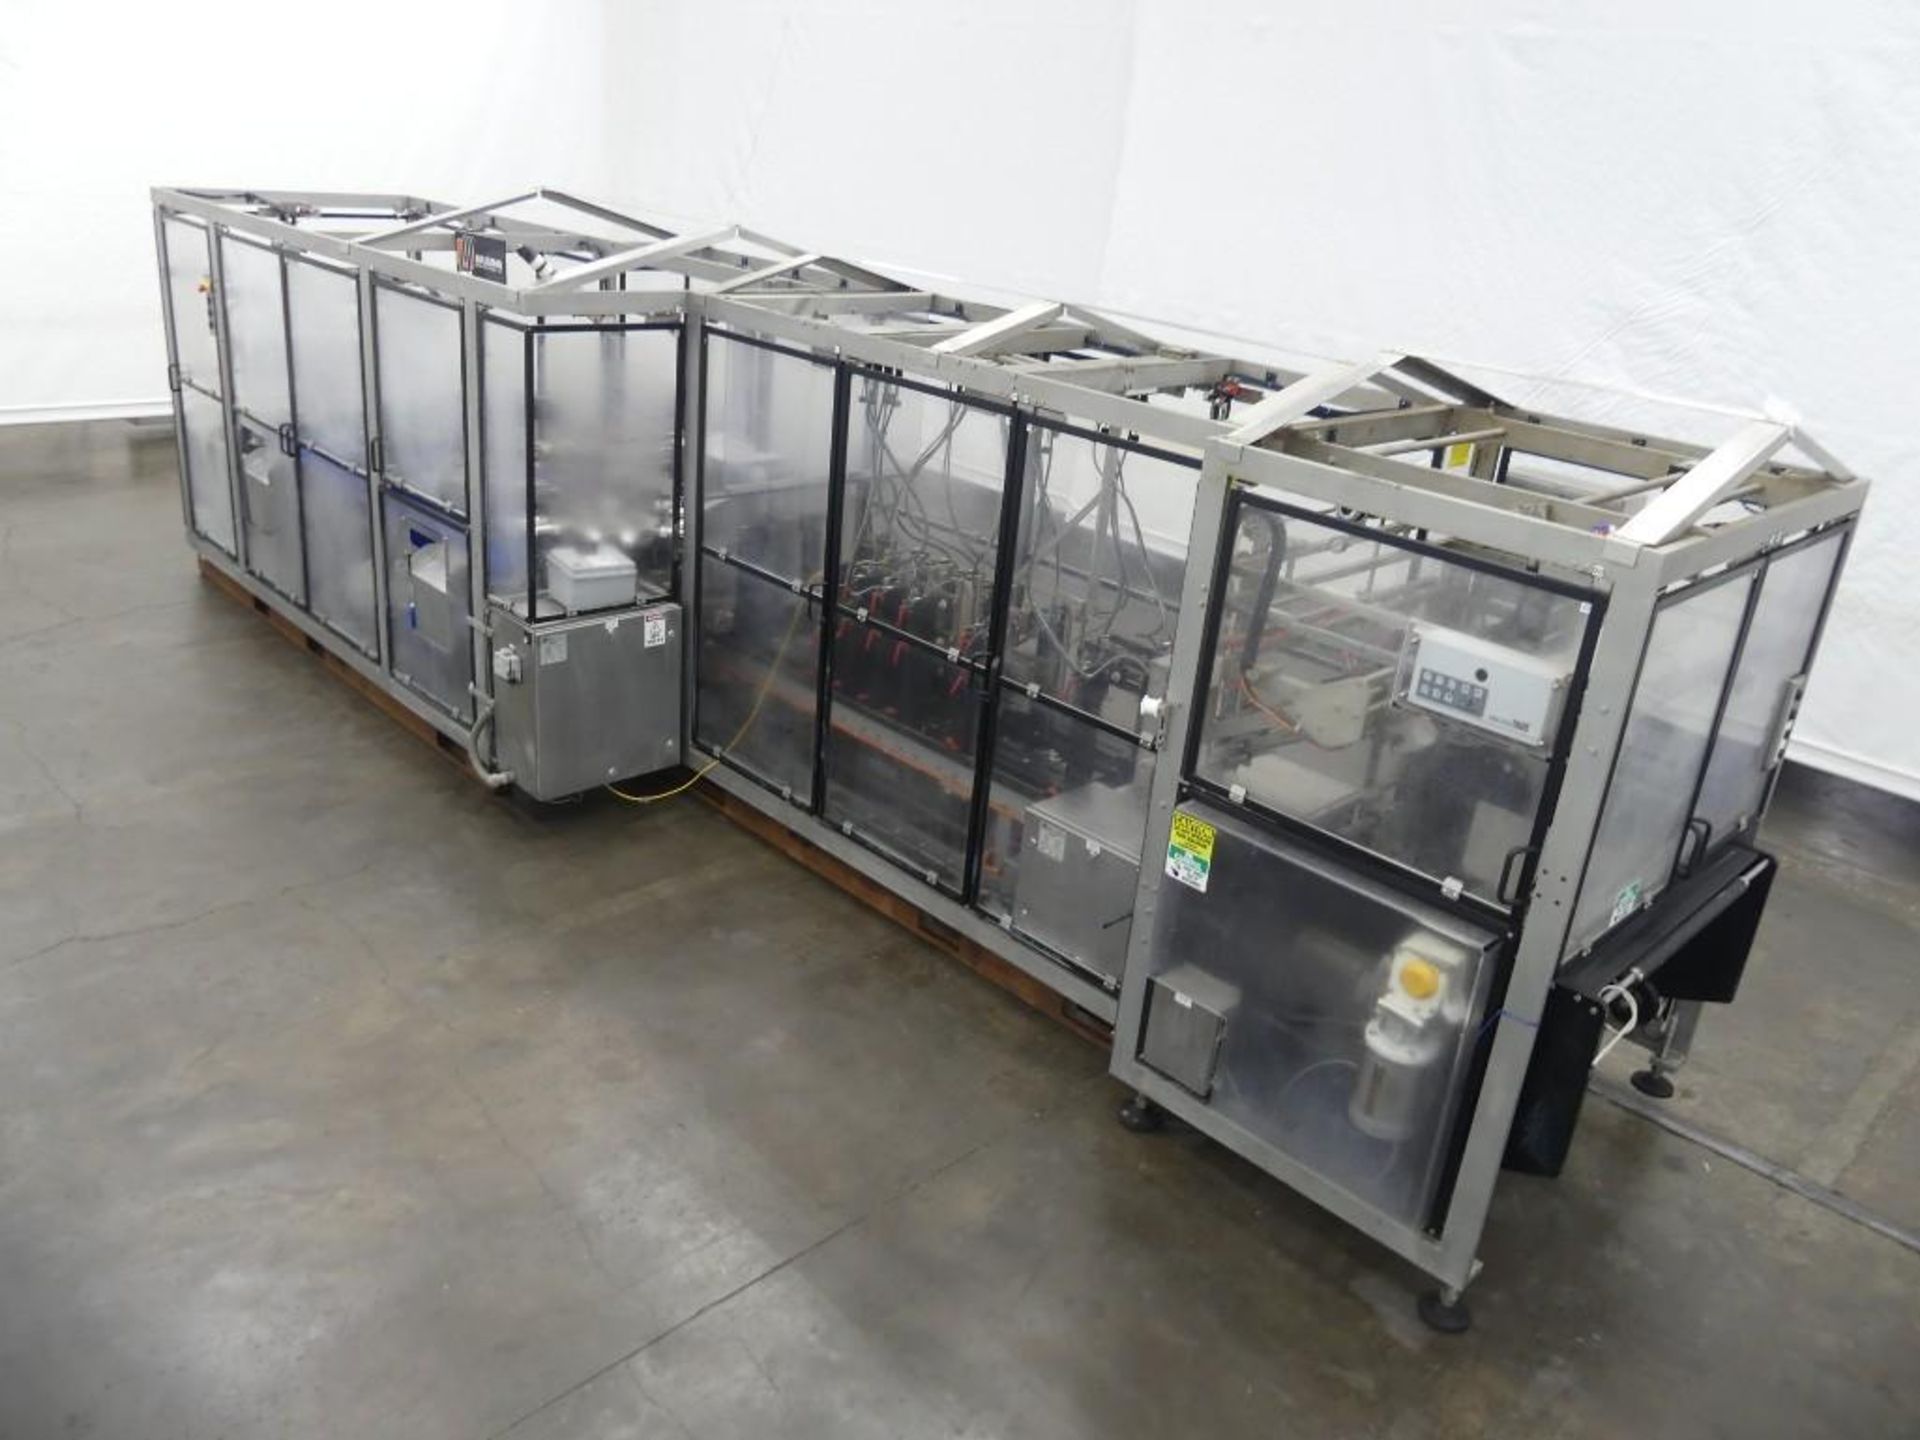 Massman HFFS-IM1000 Flexible Pouch Packaging System - Image 6 of 127